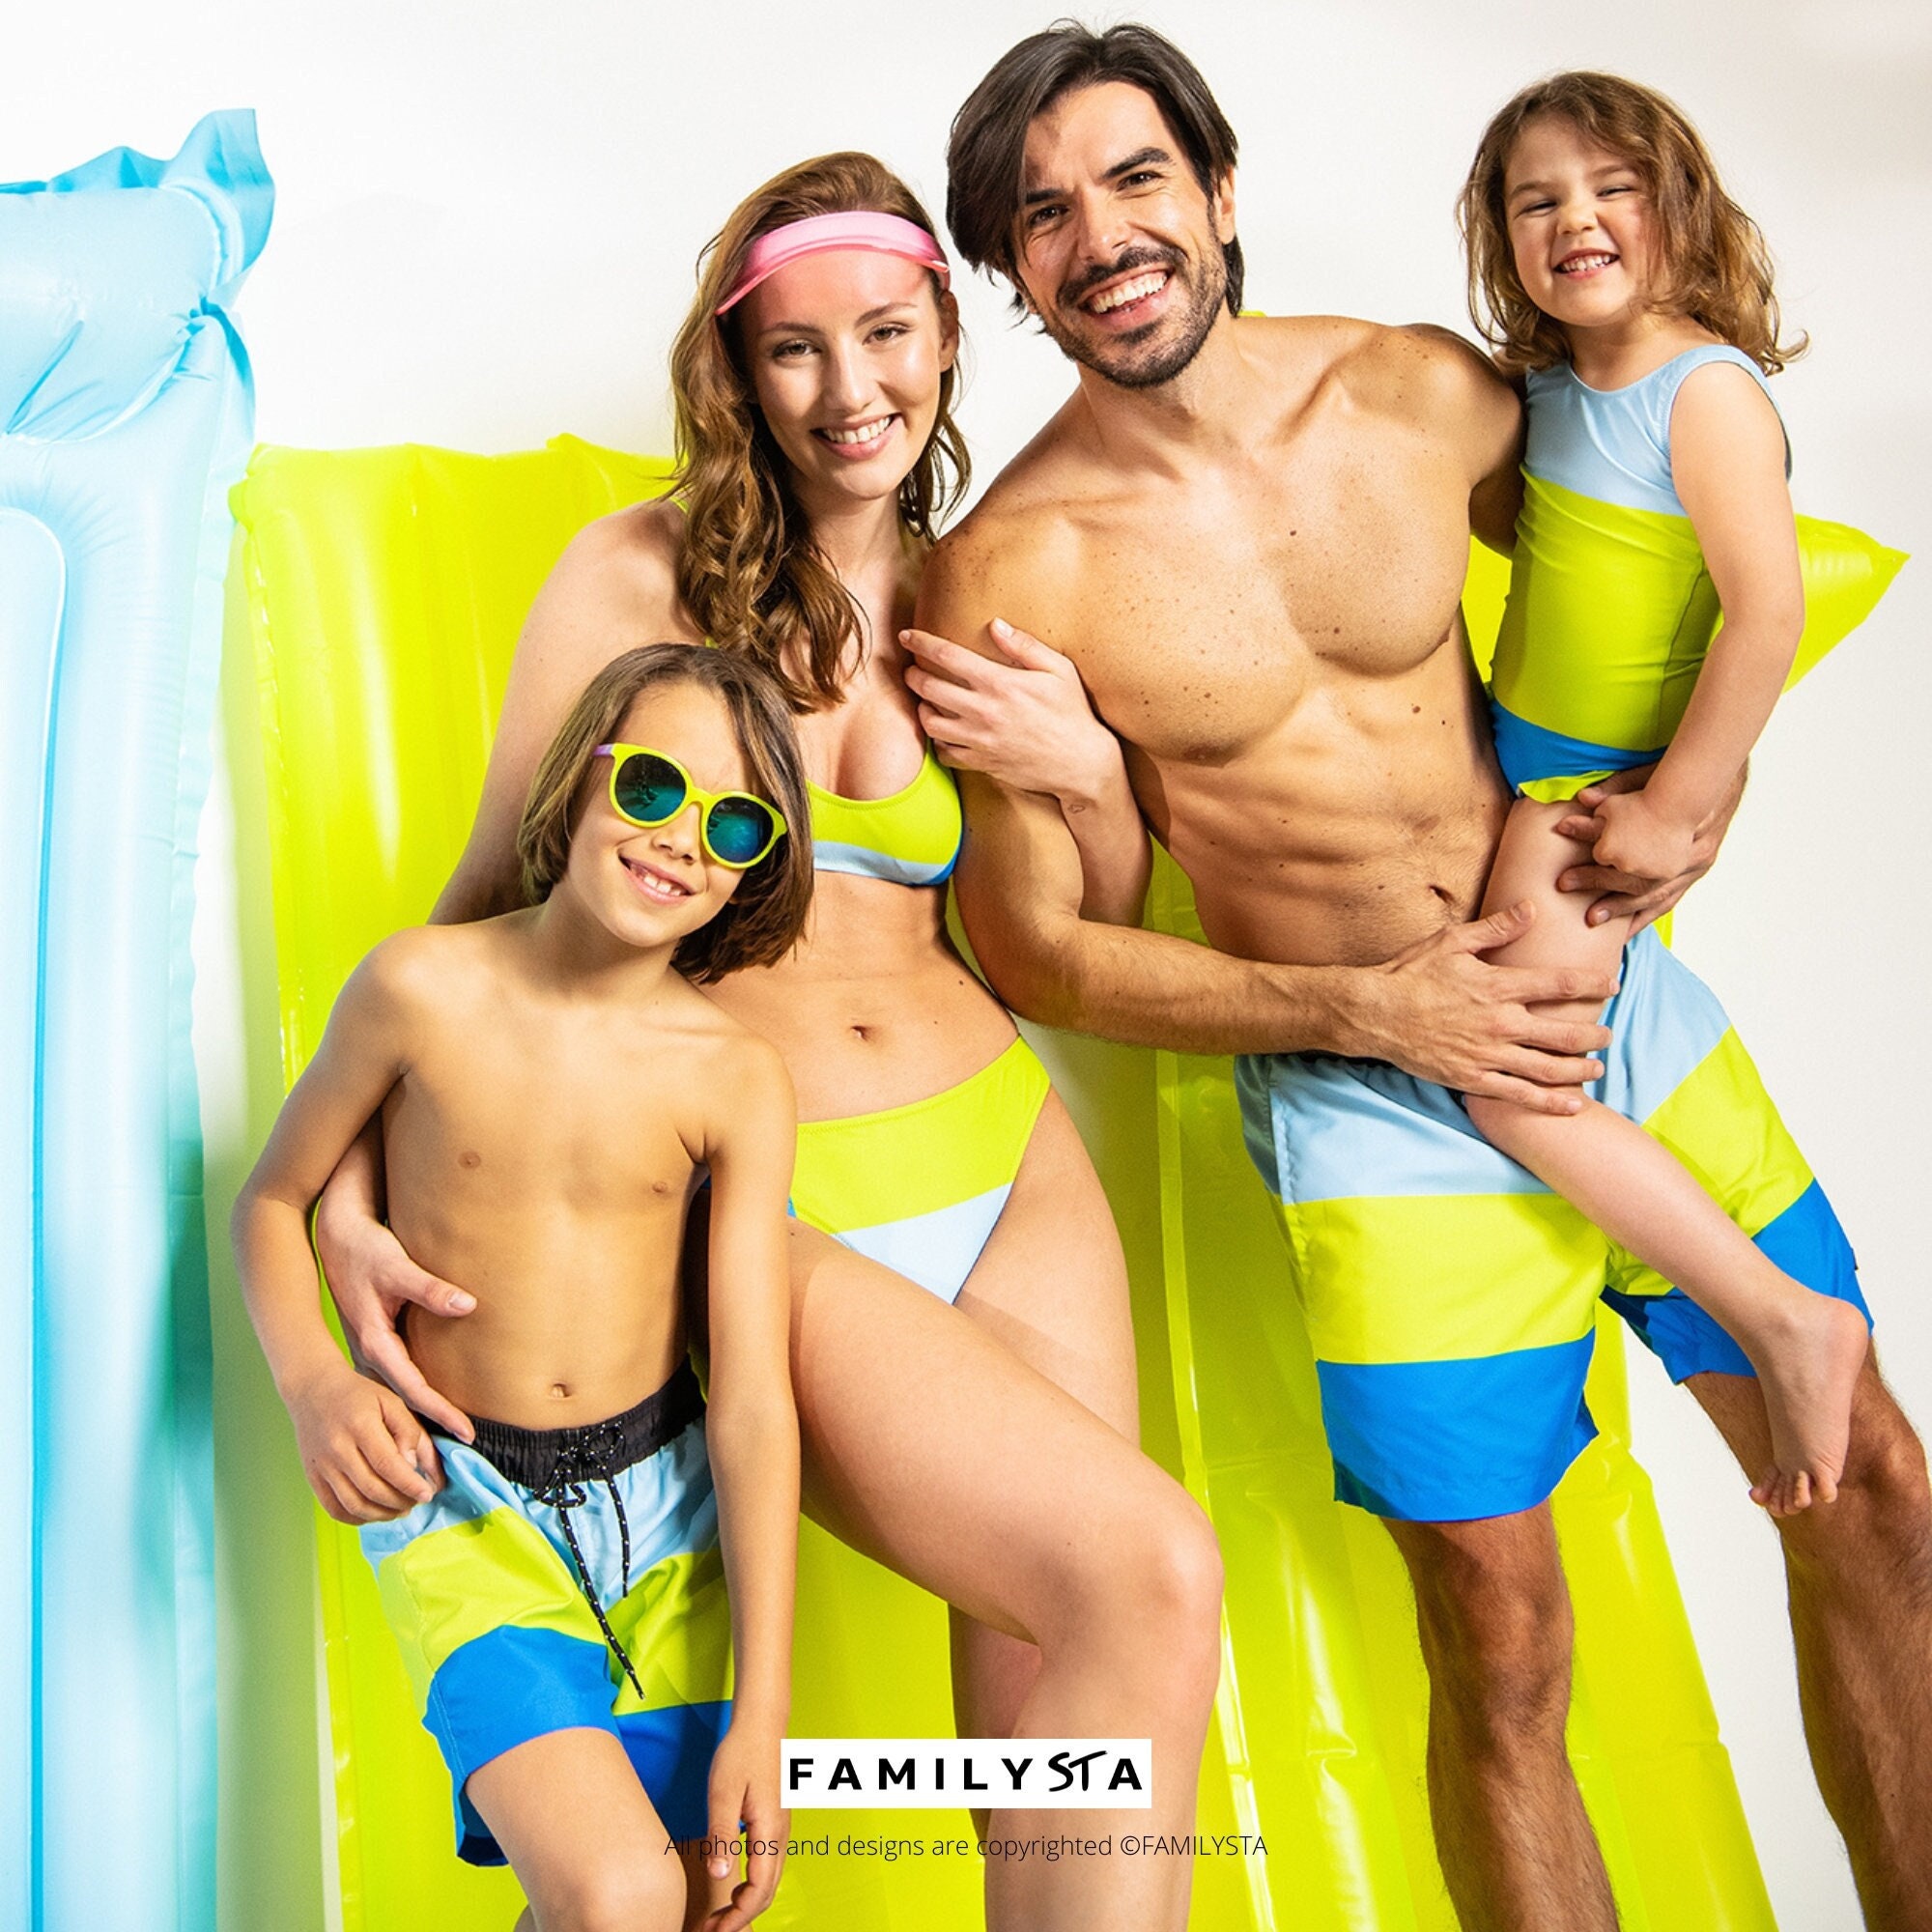 9 Super Cute Matching Swimsuits for the Whole Family